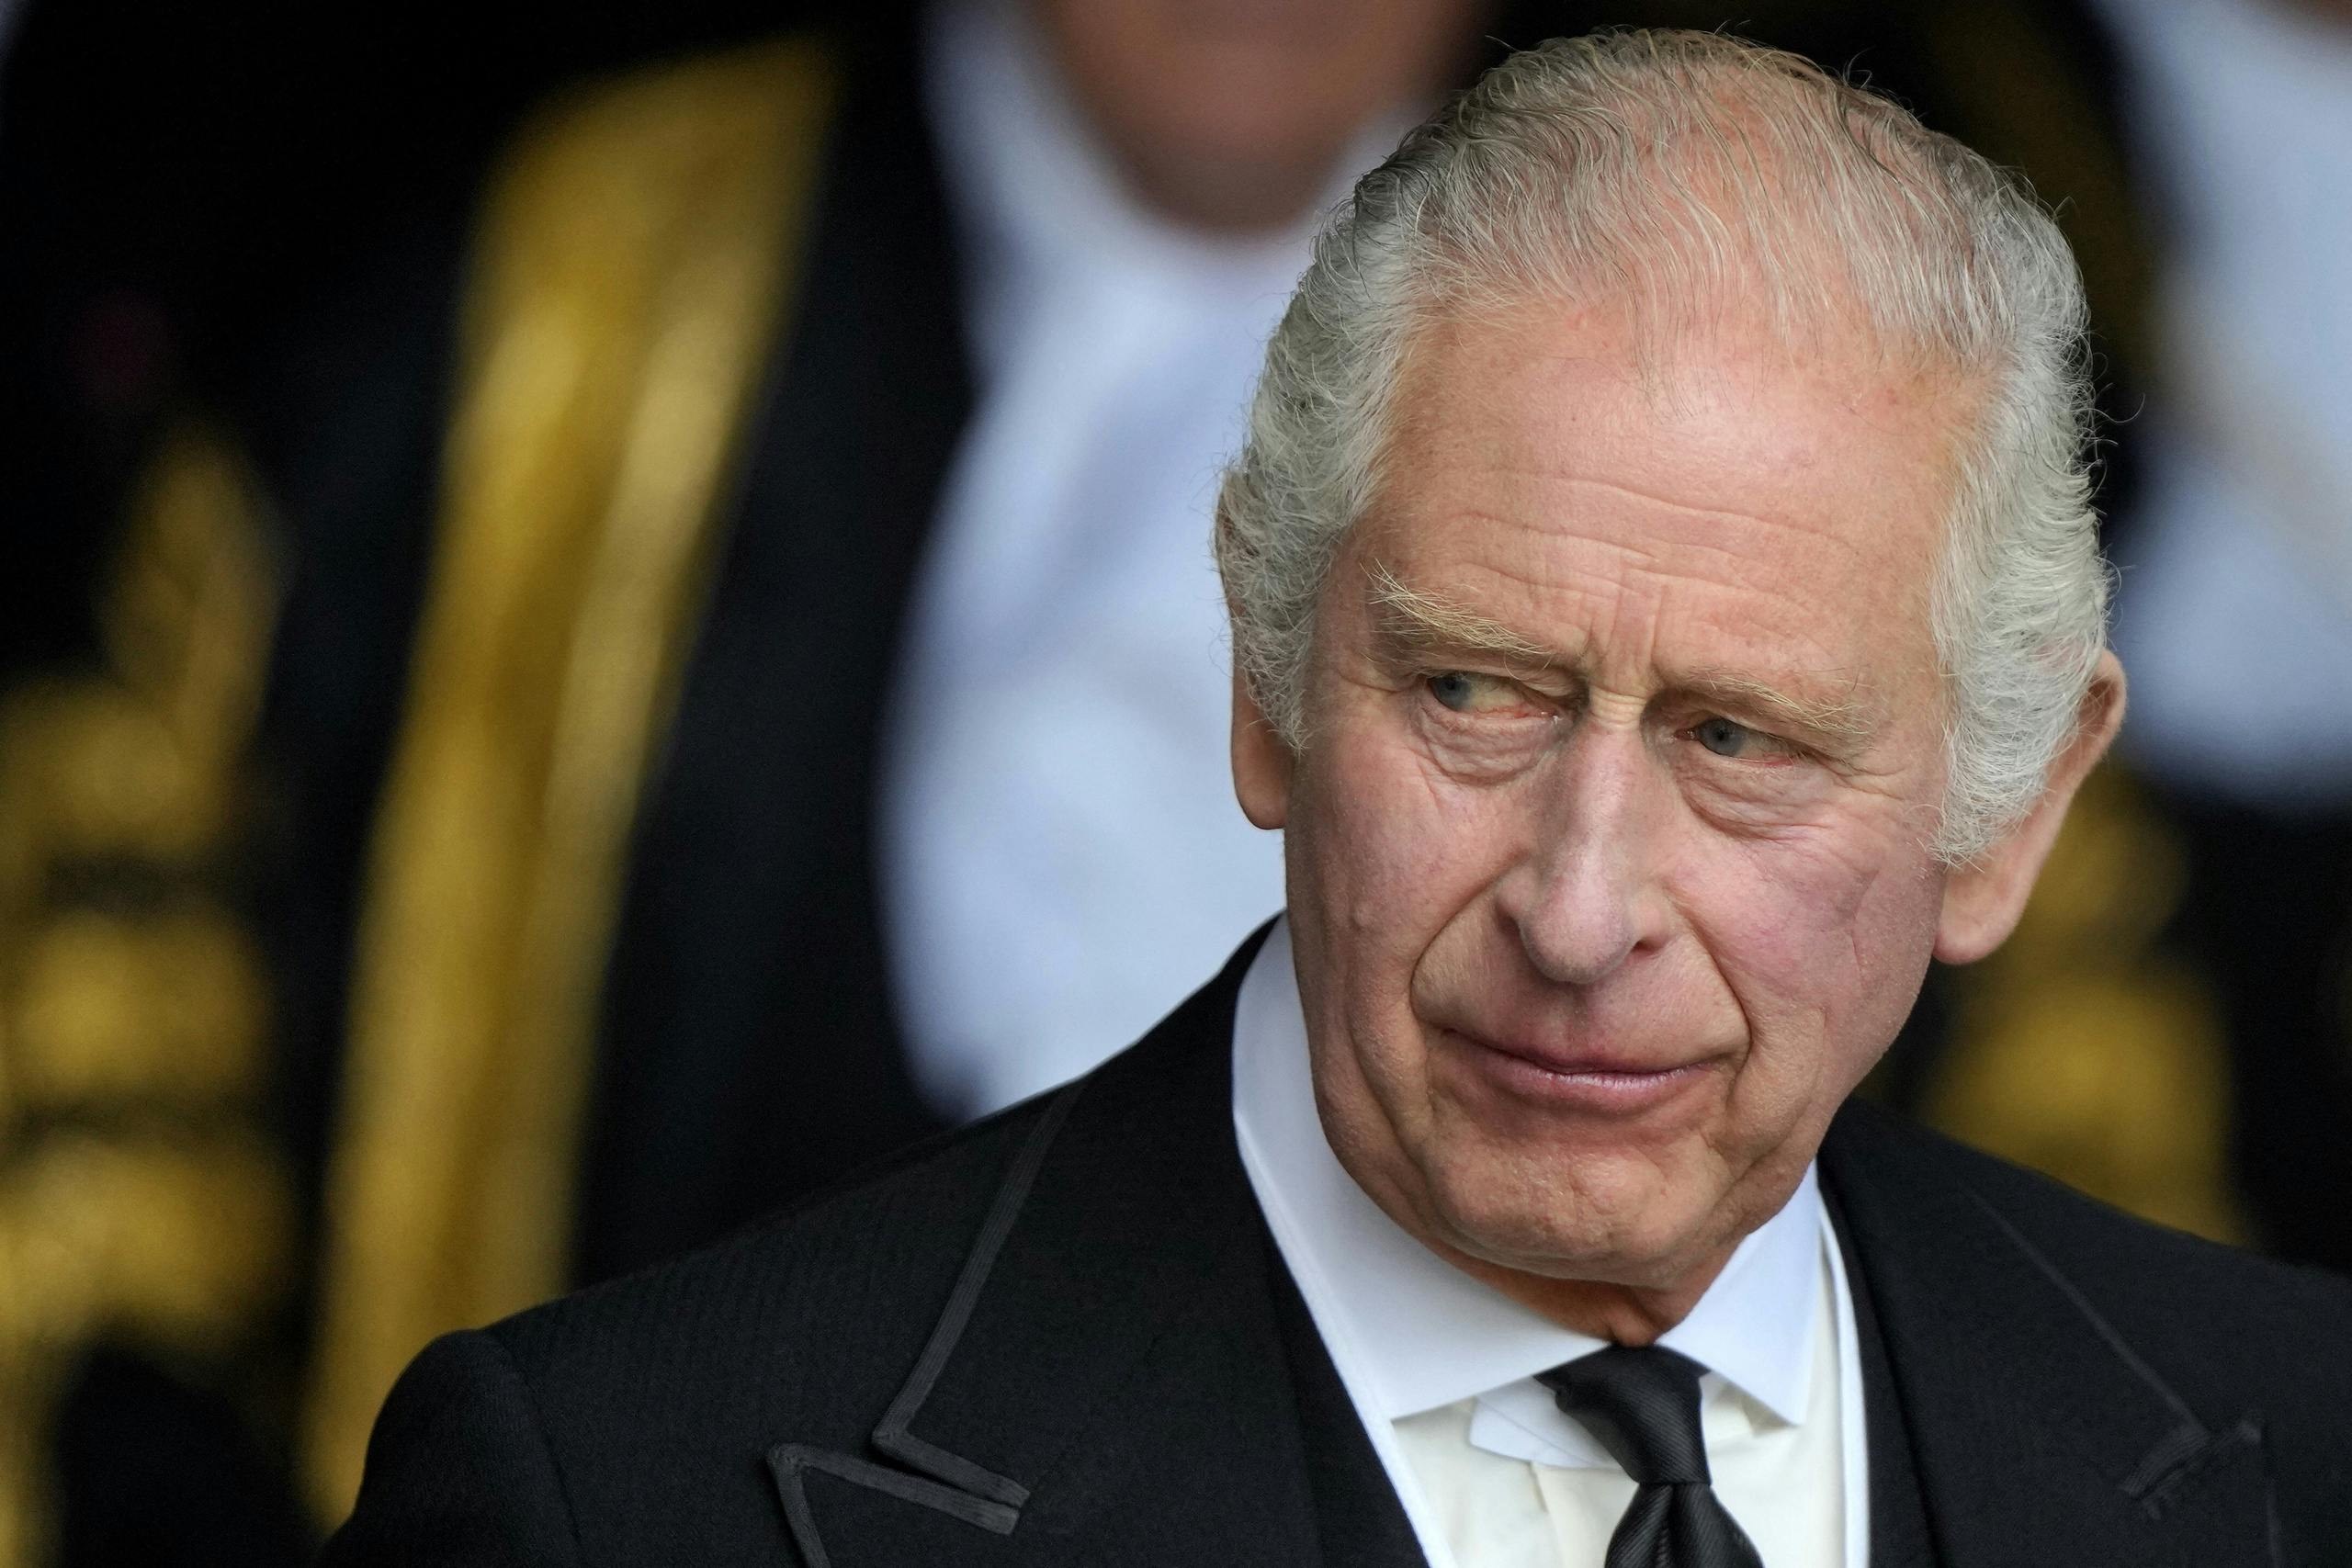 What was King Charles III’s challenge?